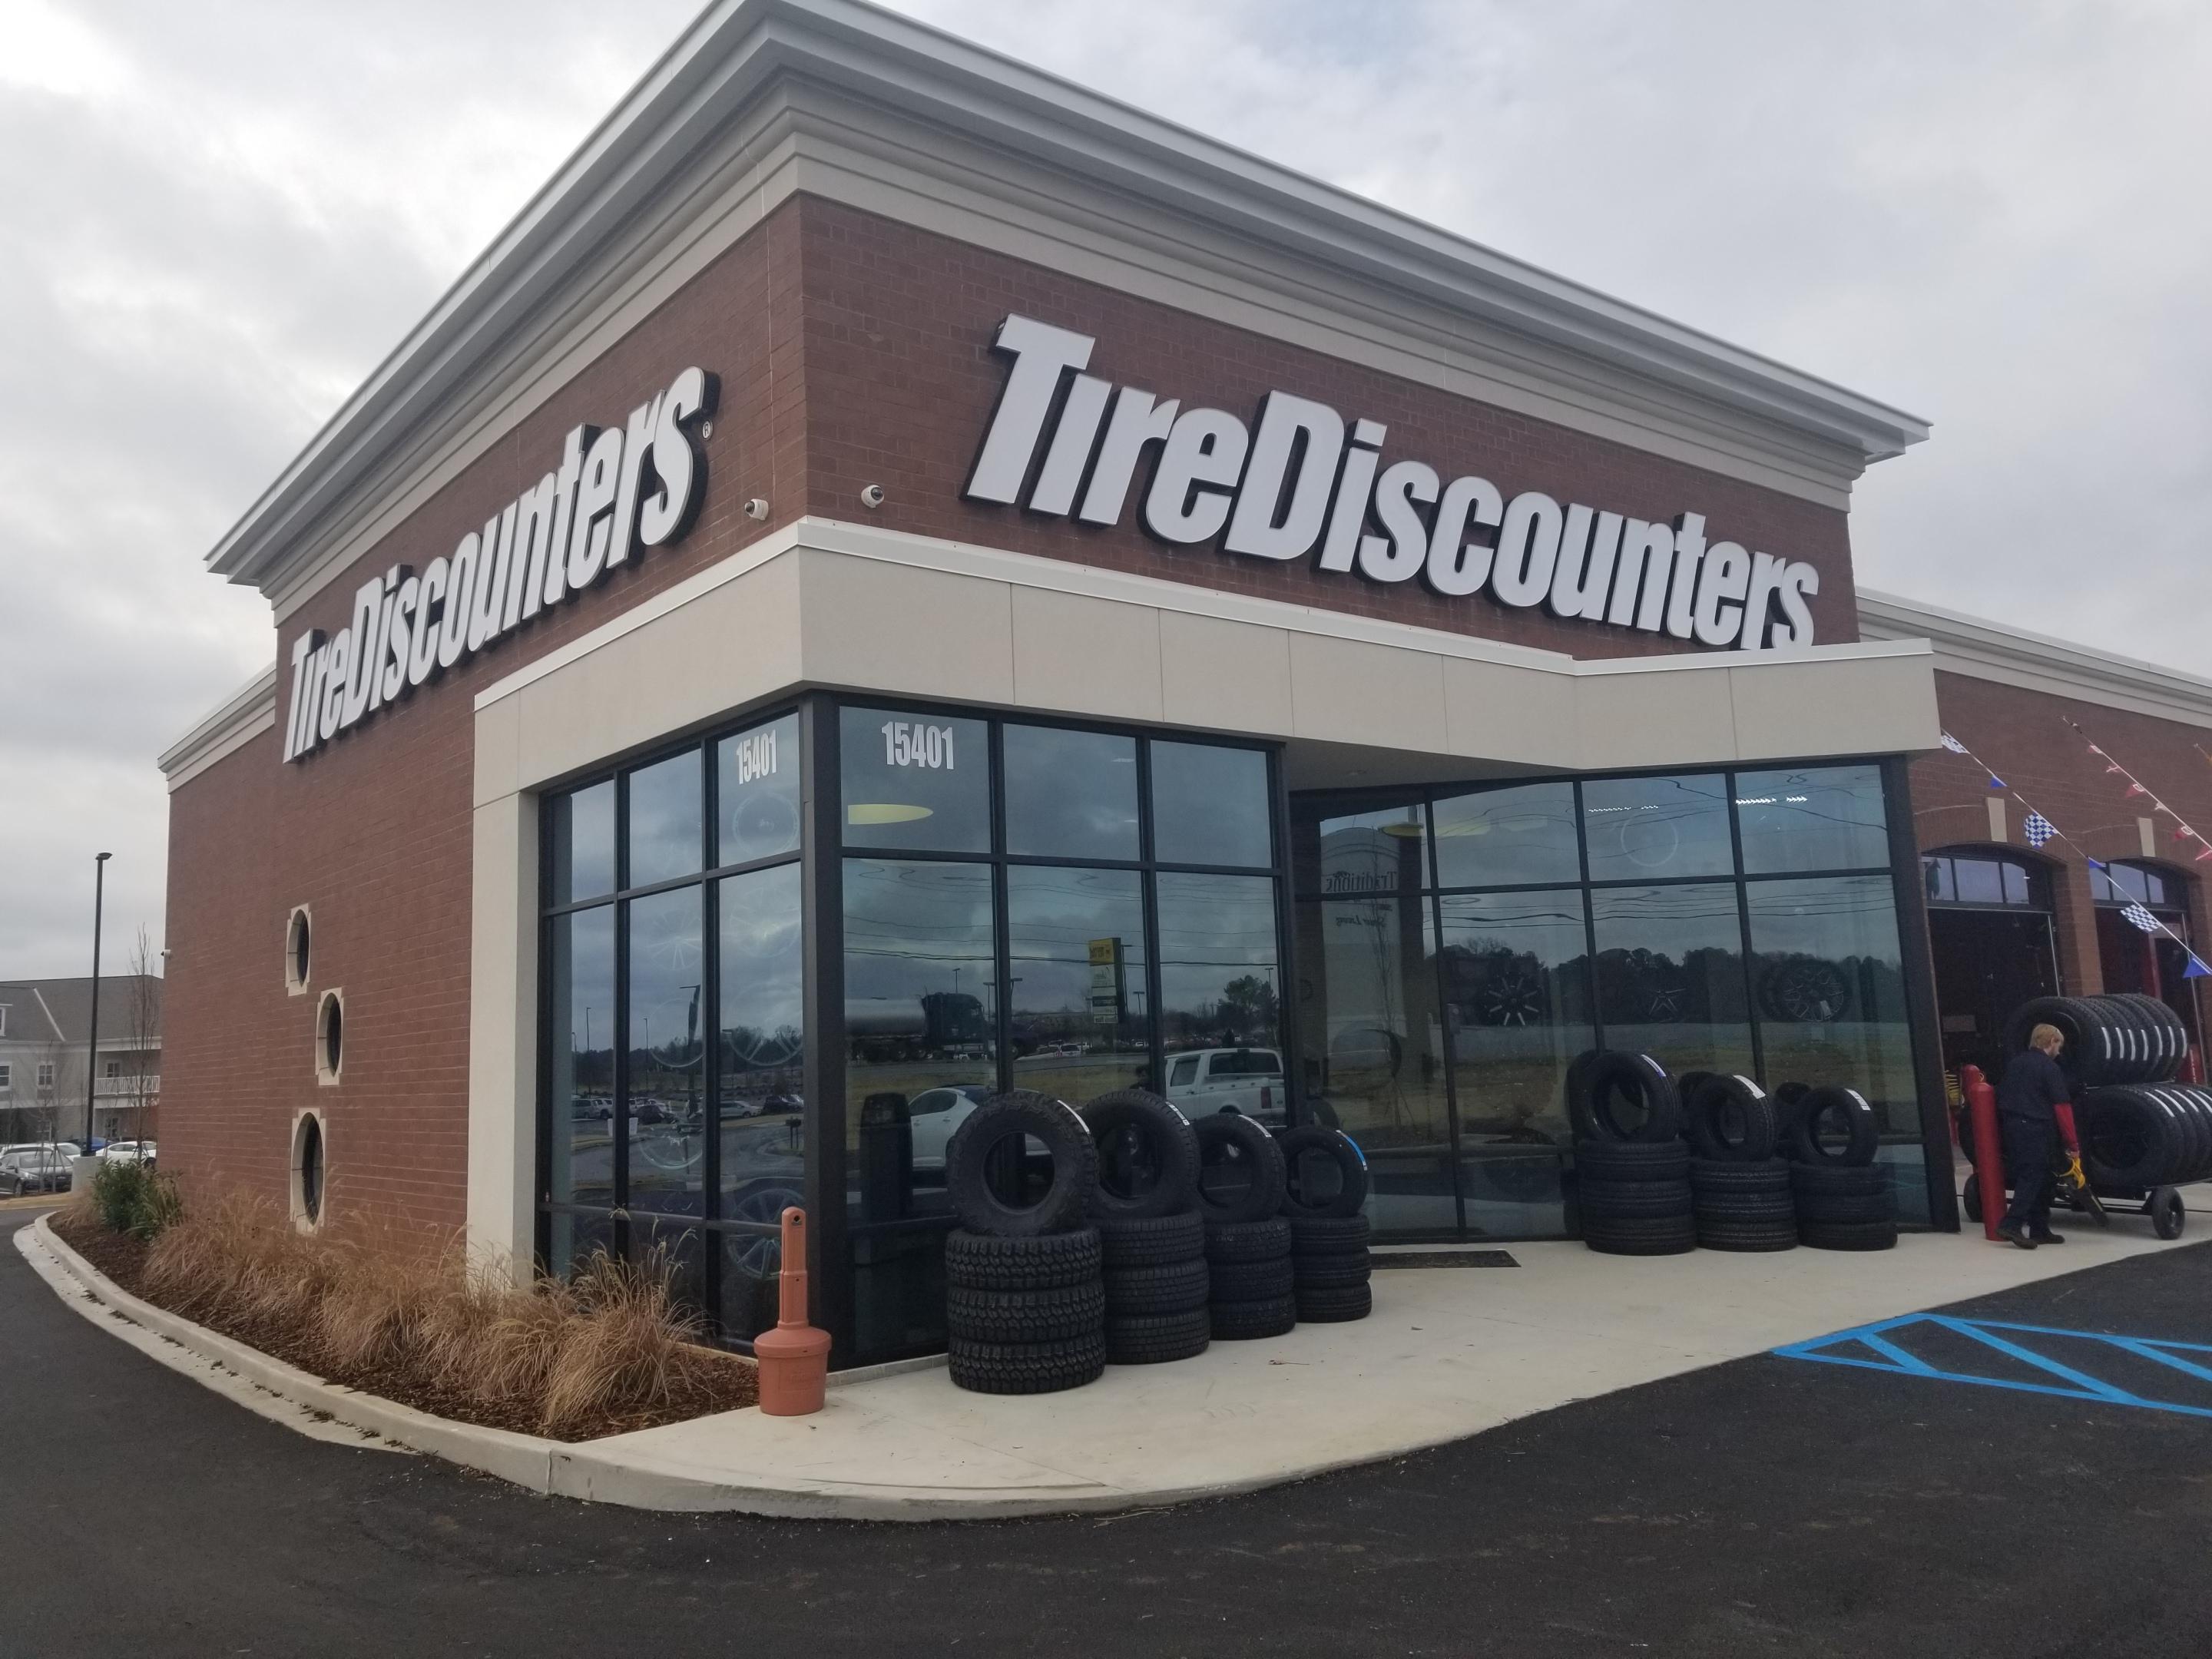 Tire Discounters on 15401 Greenfield Drive in Athens